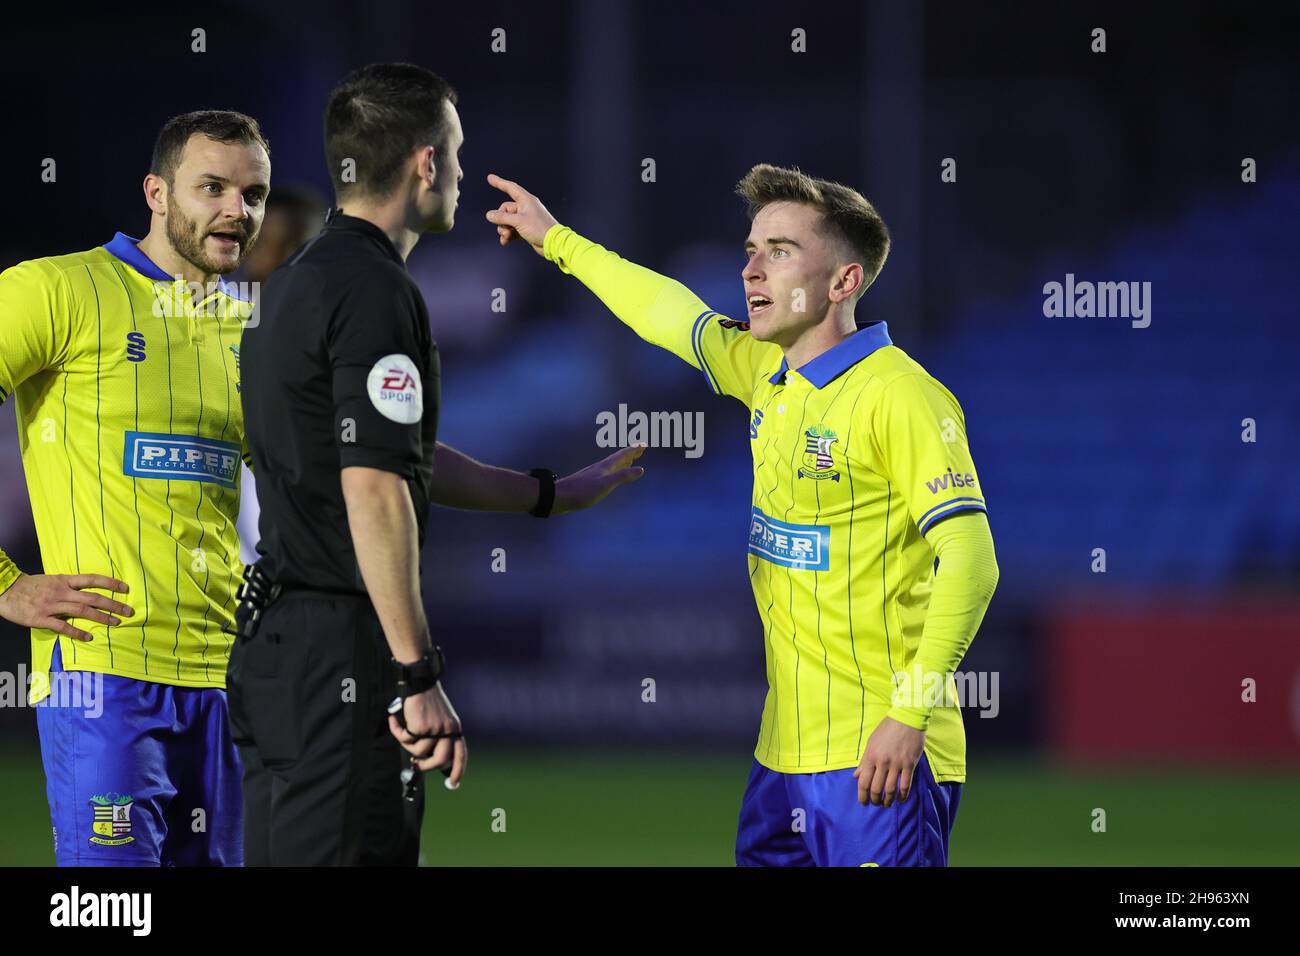 SOLIHULL, ENGLAND. DECEMBER 4TH 2021. Joe Sbarra of Solihull Moors talks to match referee Lewis Smith during the Vanarama National League match between Solihull Moors and Woking FC at the Armco Stadium, Solihull on Saturday 4th December 2021. (Credit: James Holyoak/Alamy Live News) Stock Photo